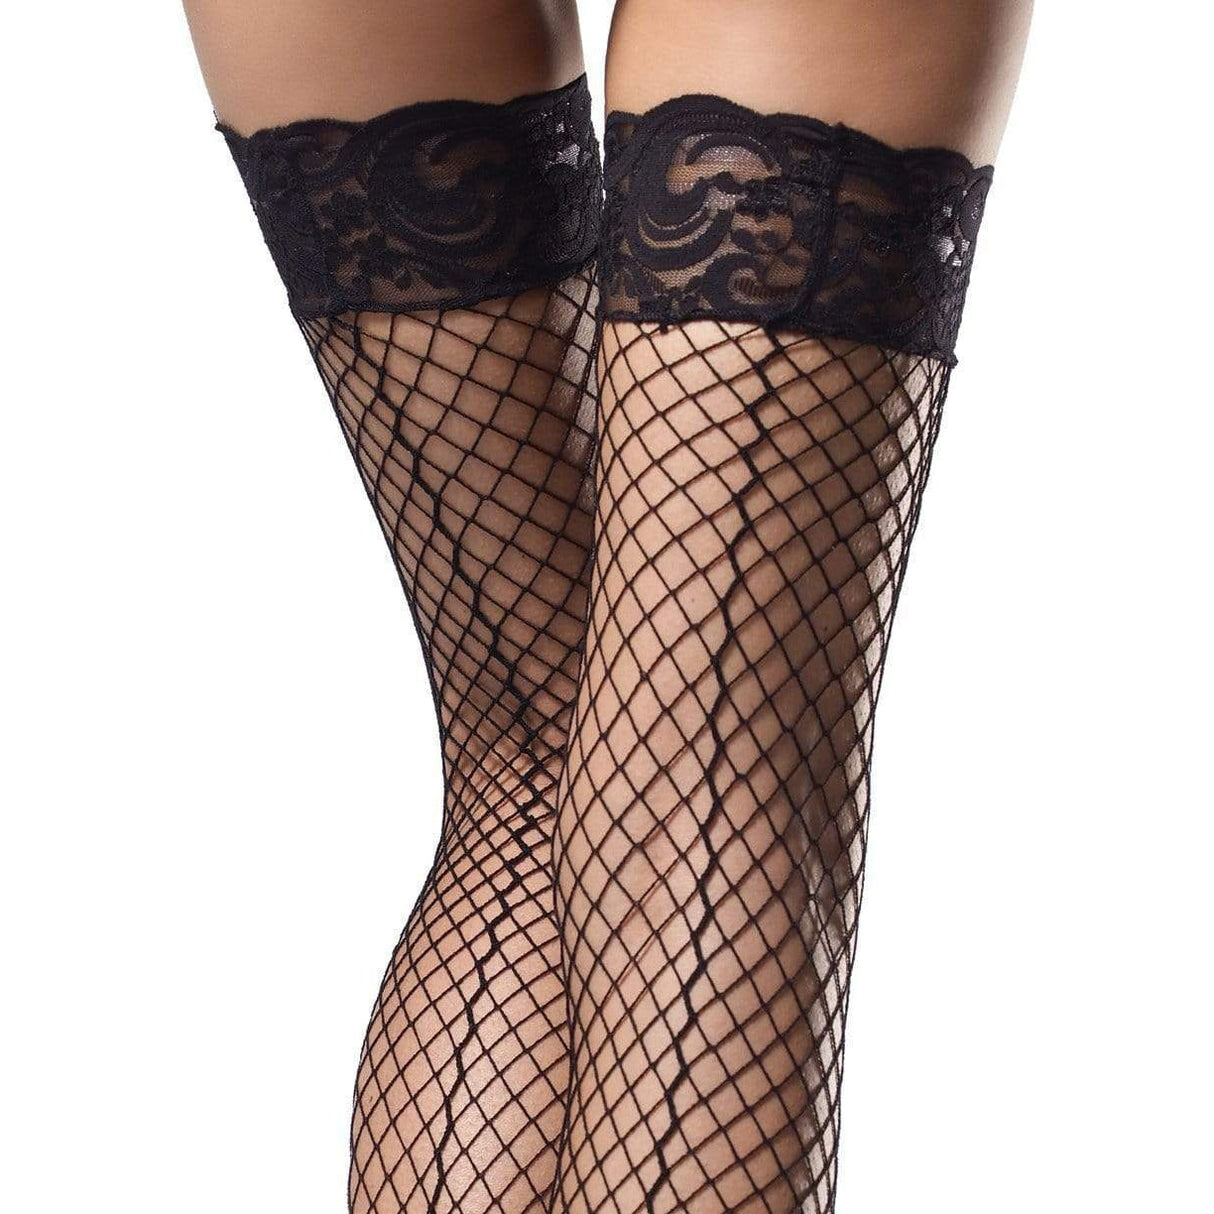 Leg Avenue Stay Up Industrial Net Backseam Thigh Highs With Lace Top and Satin Bow Accent